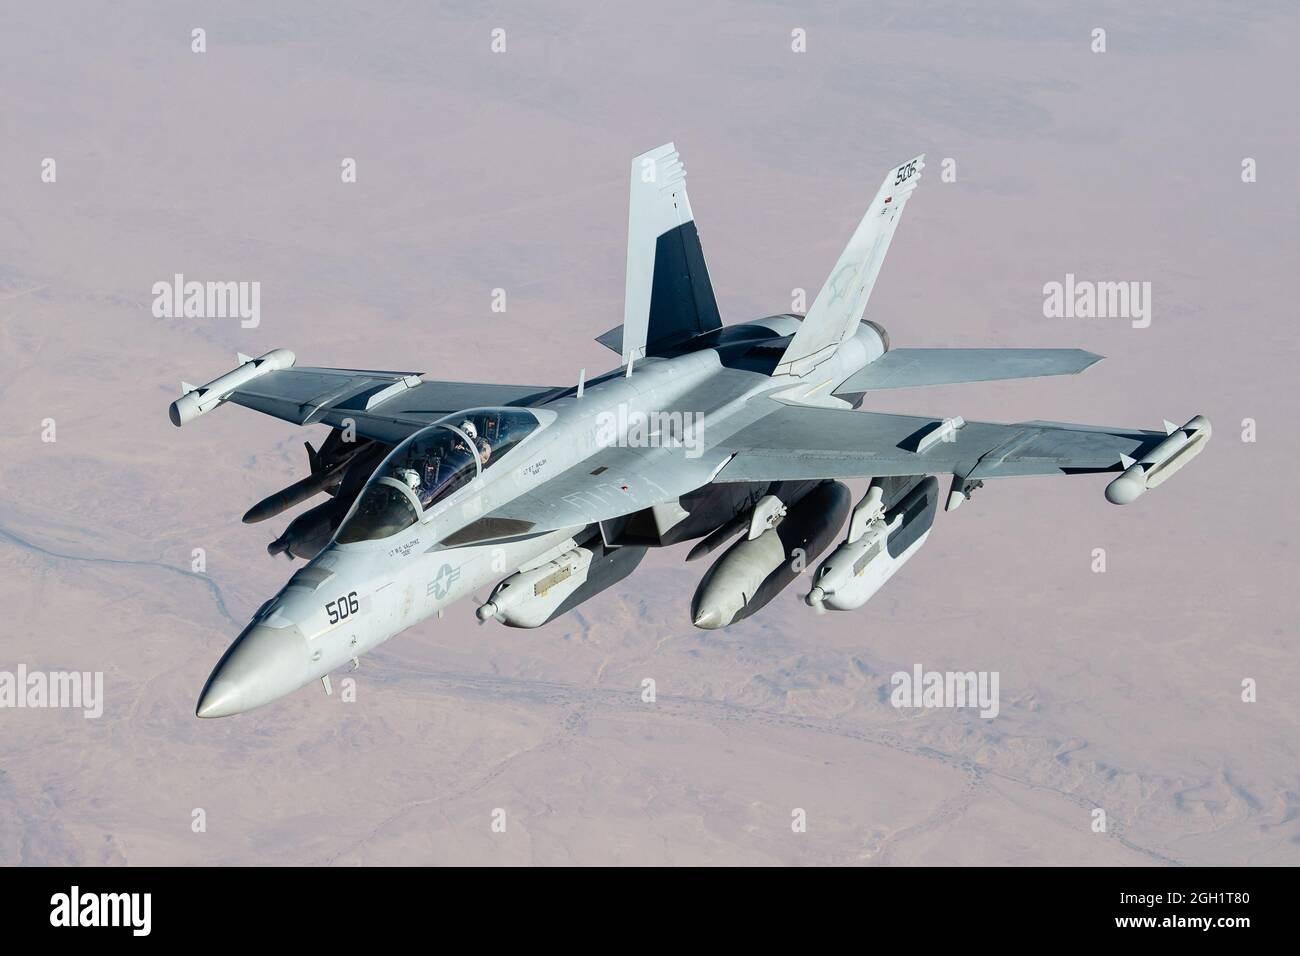 U.S. CENTRAL COMMAND AREA OF RESPONSIBILITY (Sept. 25, 2020) A U.S. Navy E/A-18G Growler, assigned to the 'Cougars' of Electronic Attack Squadron (VAQ Stock Photo